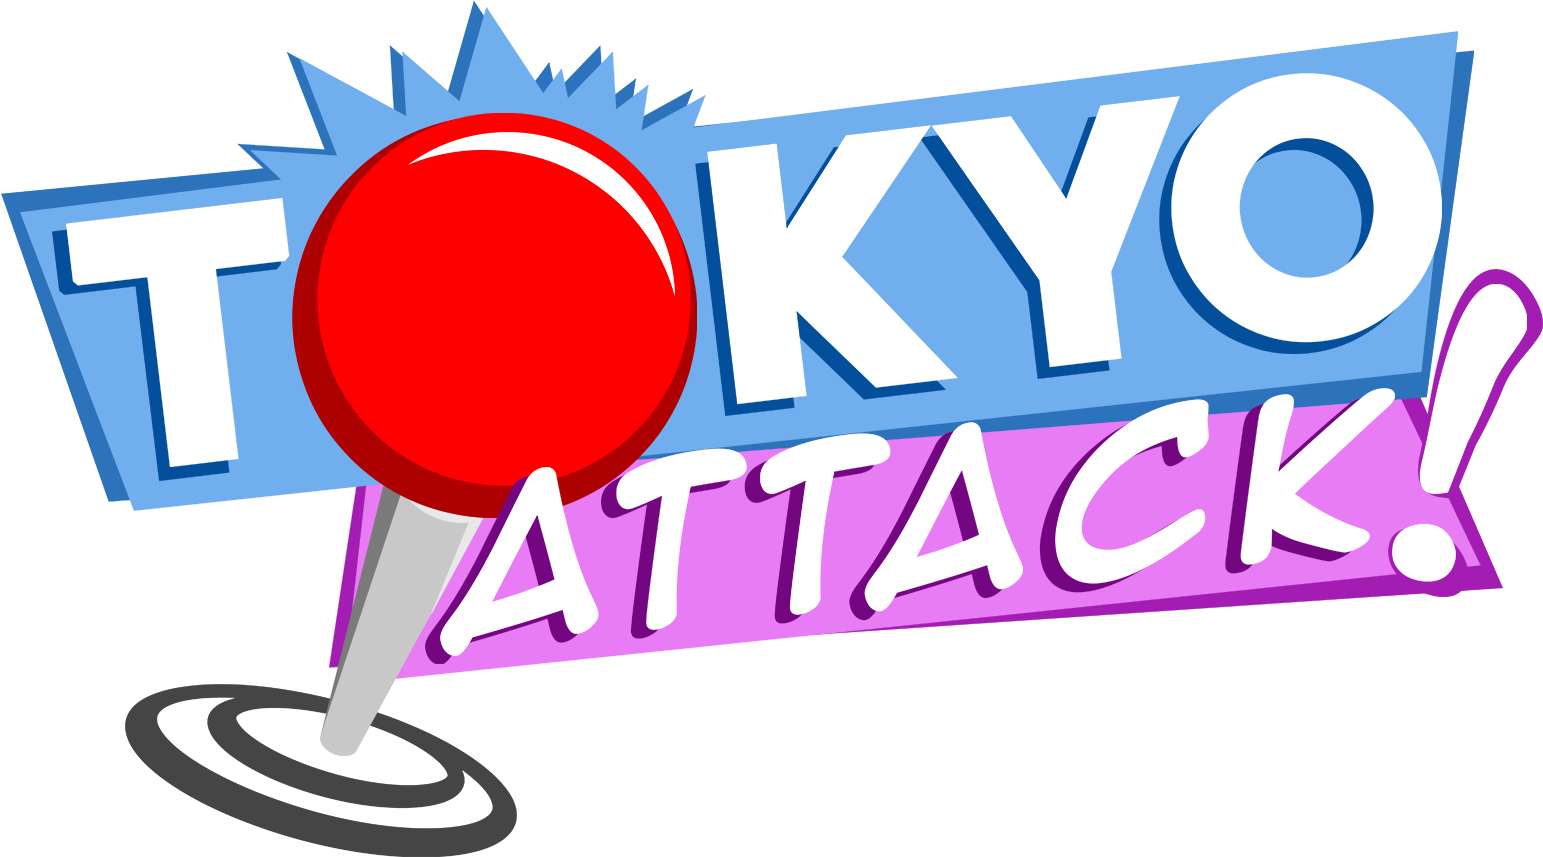 We Are Happy To Welcome Back The Awesome Tokyo Attack - We Are Happy To Welcome Back The Awesome Tokyo Attack (1667x954)